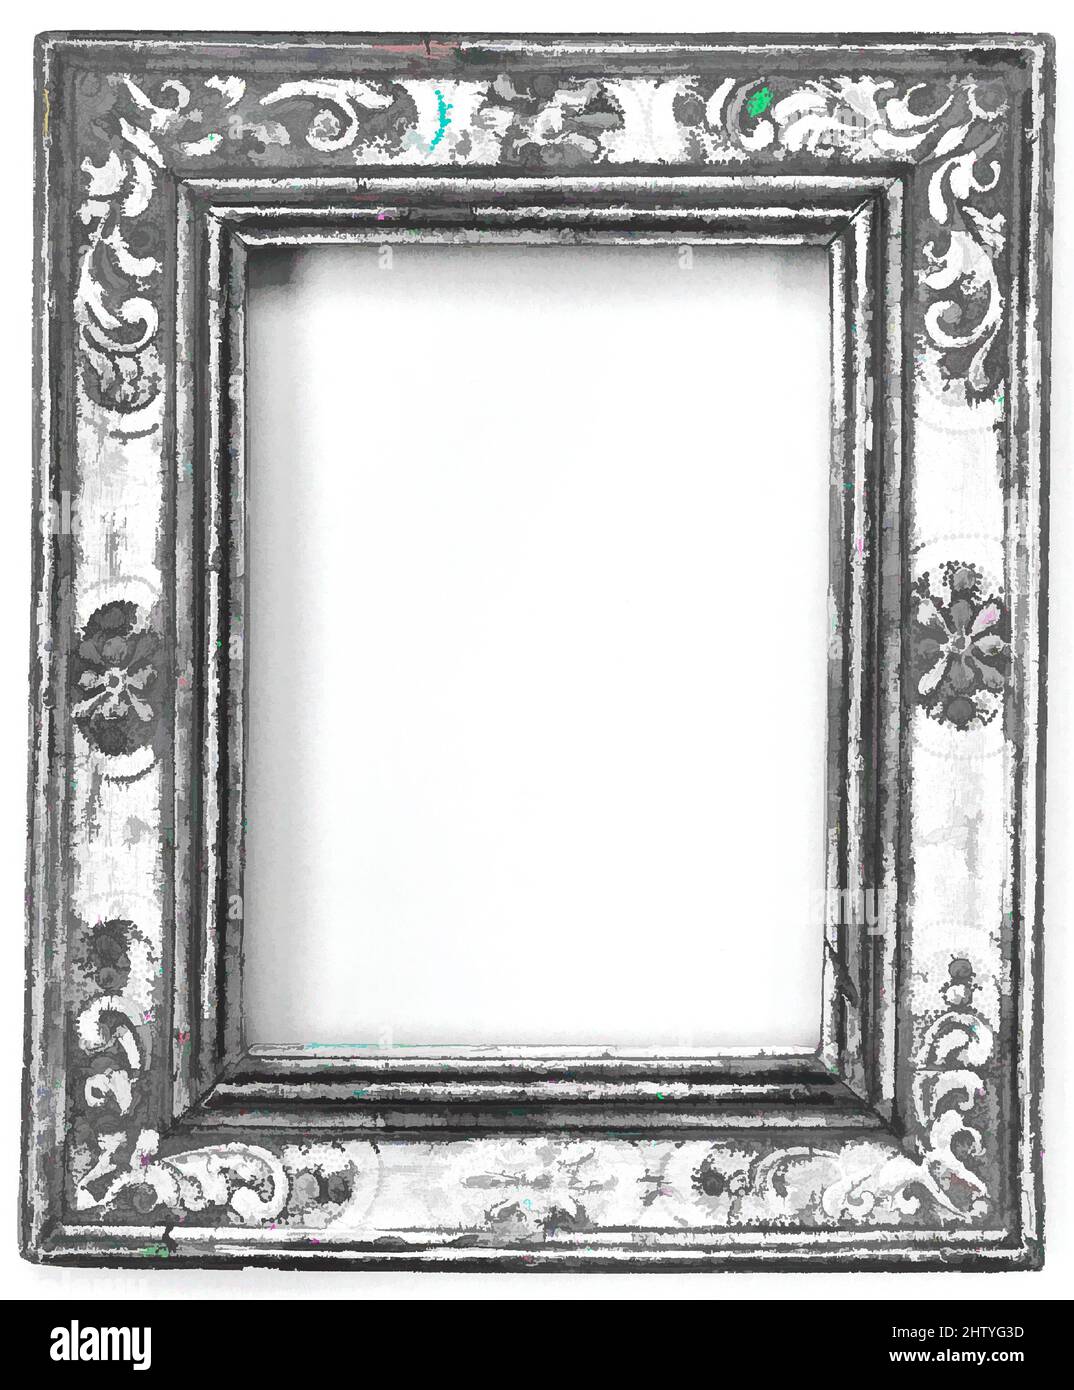 Art inspired by Cassetta frame, early 17th century, Italian, Veneto or Marches, Poplar, 33 x 27.1, 21.3 x 15.2, 22.6 x 16.5 cm., Frames, Classic works modernized by Artotop with a splash of modernity. Shapes, color and value, eye-catching visual impact on art. Emotions through freedom of artworks in a contemporary way. A timeless message pursuing a wildly creative new direction. Artists turning to the digital medium and creating the Artotop NFT Stock Photo